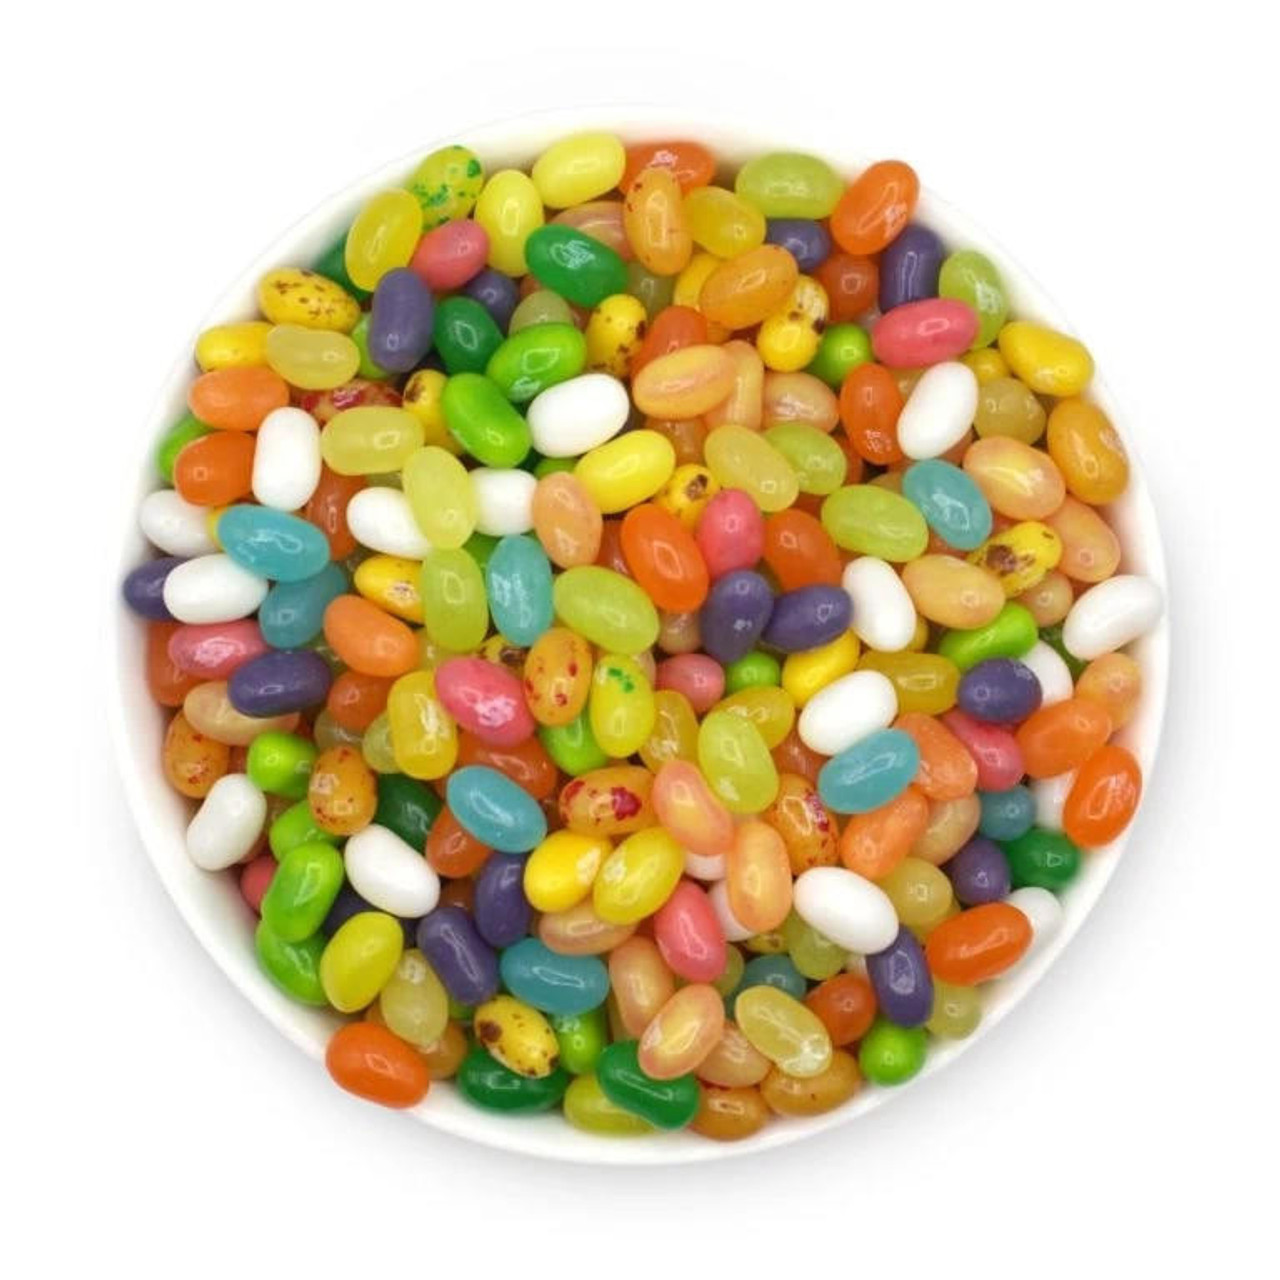 A2ZCHEF Jelly Belly, Tropical (Jelly Beans) - 20 lb. Case 